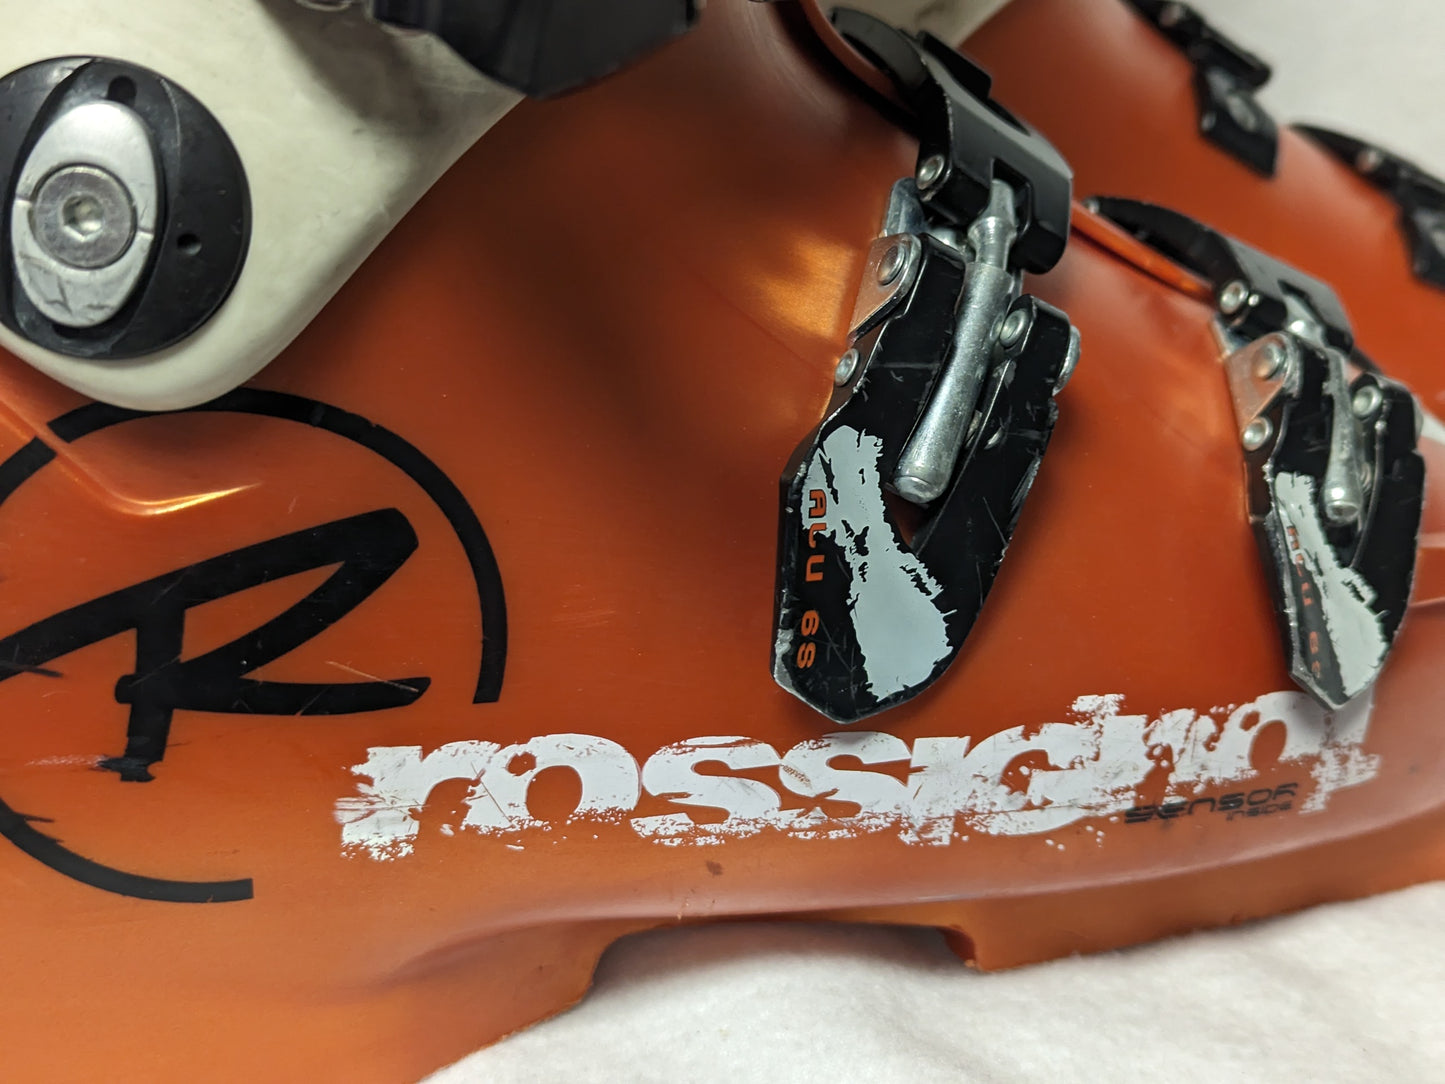 Rossignol World Cup 110 Ski Boots Size 25.5 Color Orange Condition Used